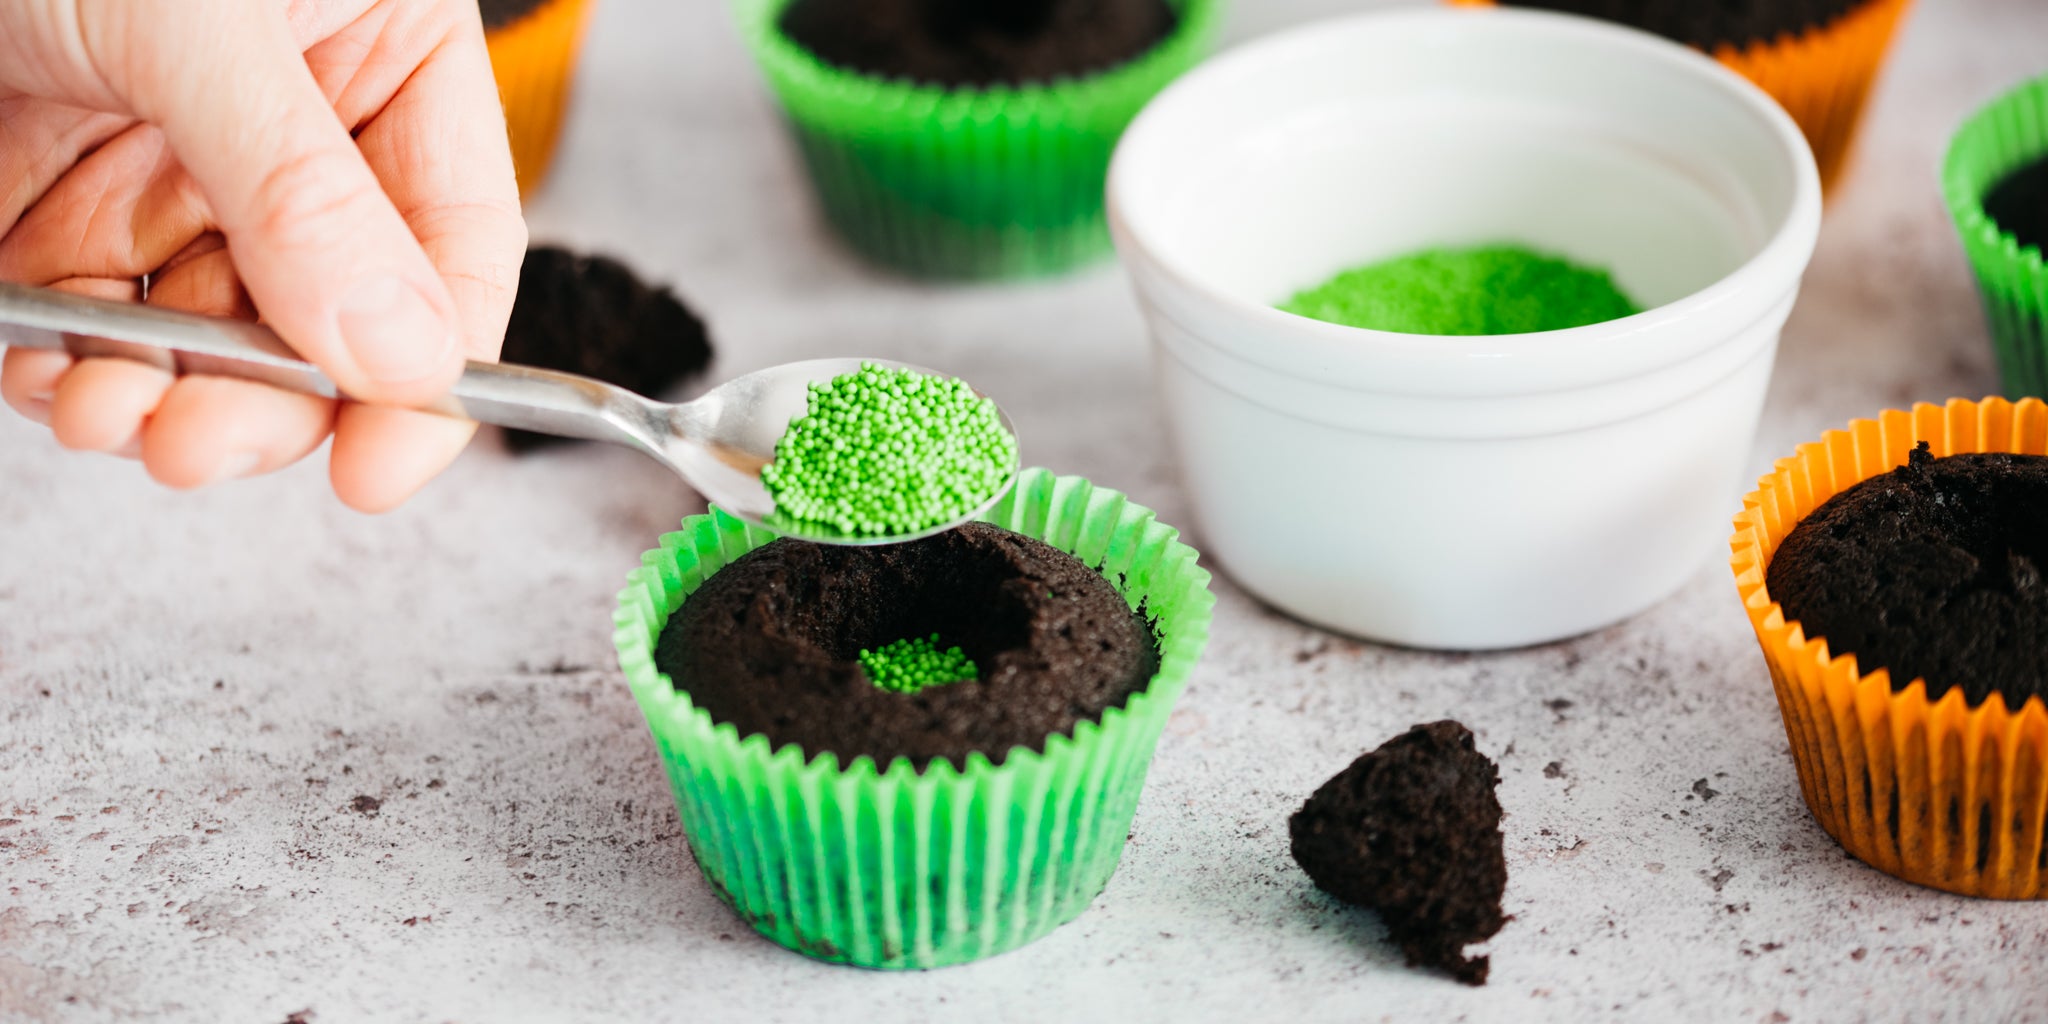 Hand spoon green sprinkles into centre of cupcake